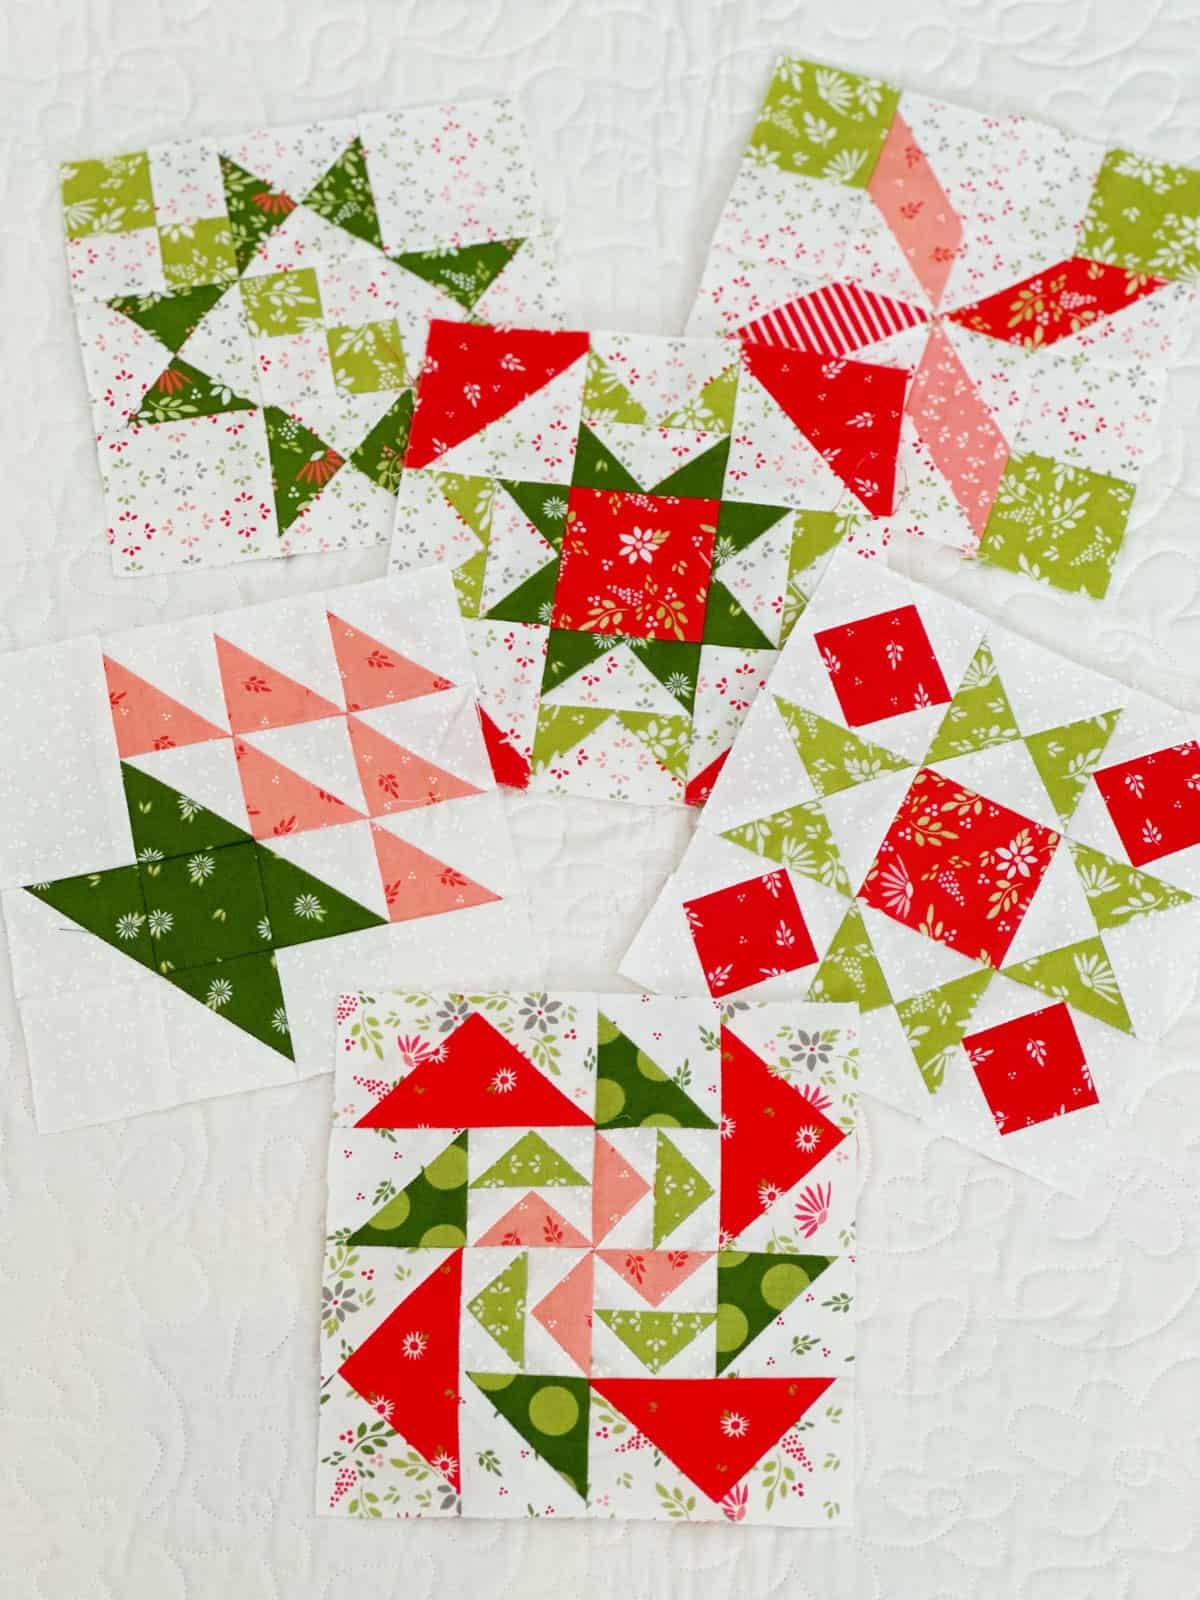 Quilt Block of the Month June 2023 featured by Top US Quilt Blog, A Quilting Life